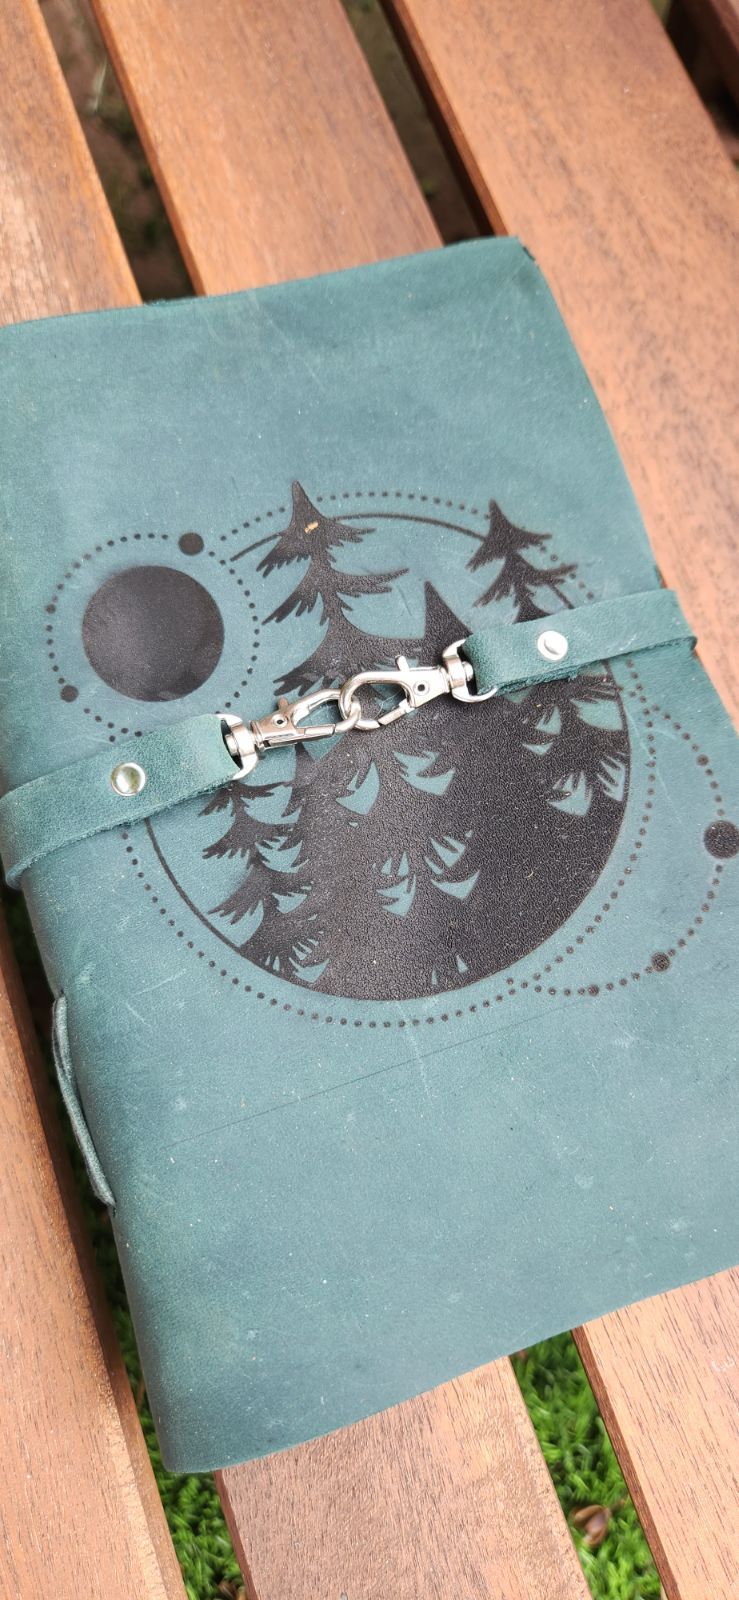 Deep in the forest leather journal & sketchbook